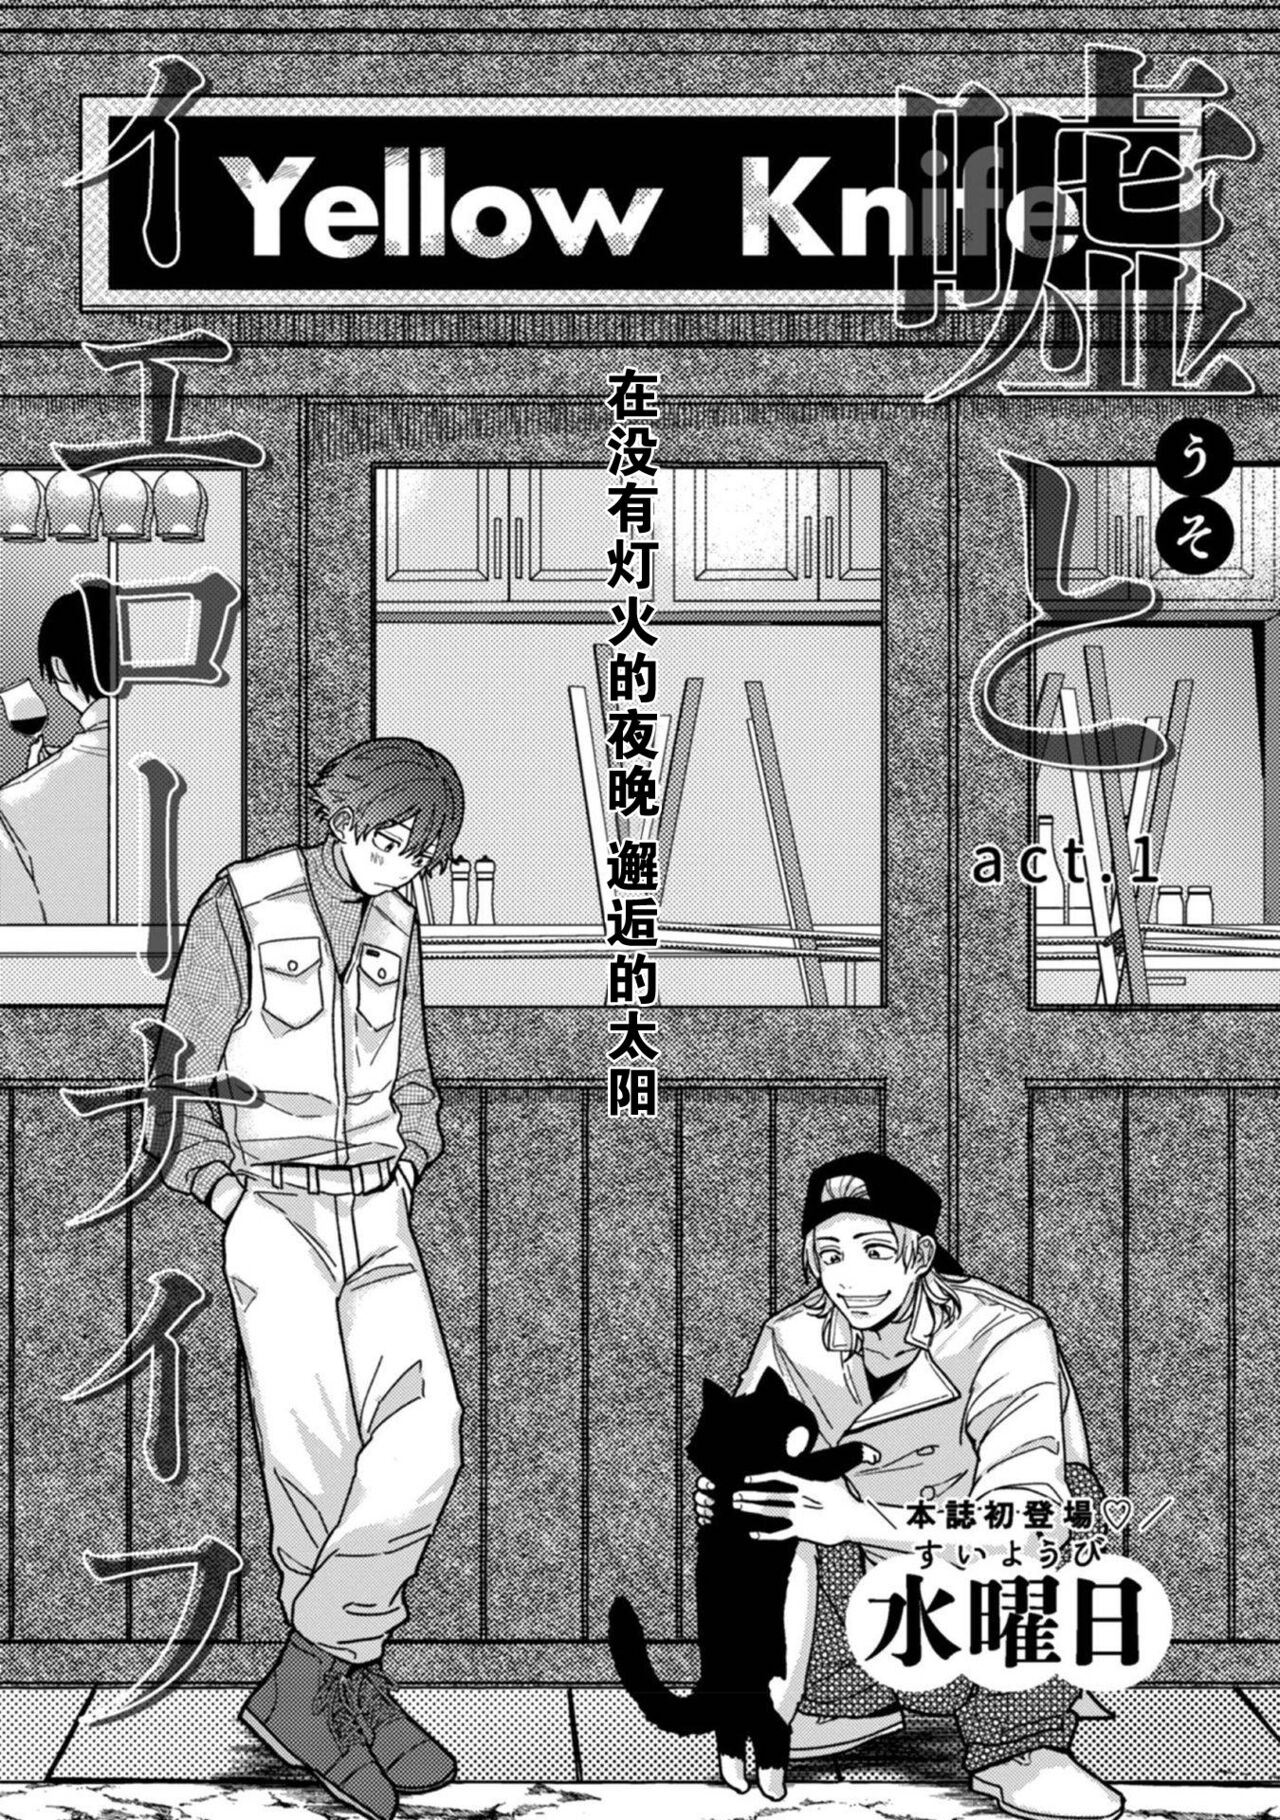 (Sui You Bi)Lies and Yellowknife 1[谎言与黄色小刀 第一话][Chinese][看海汉化组] (水曜日)嘘とイエローナイフ 1